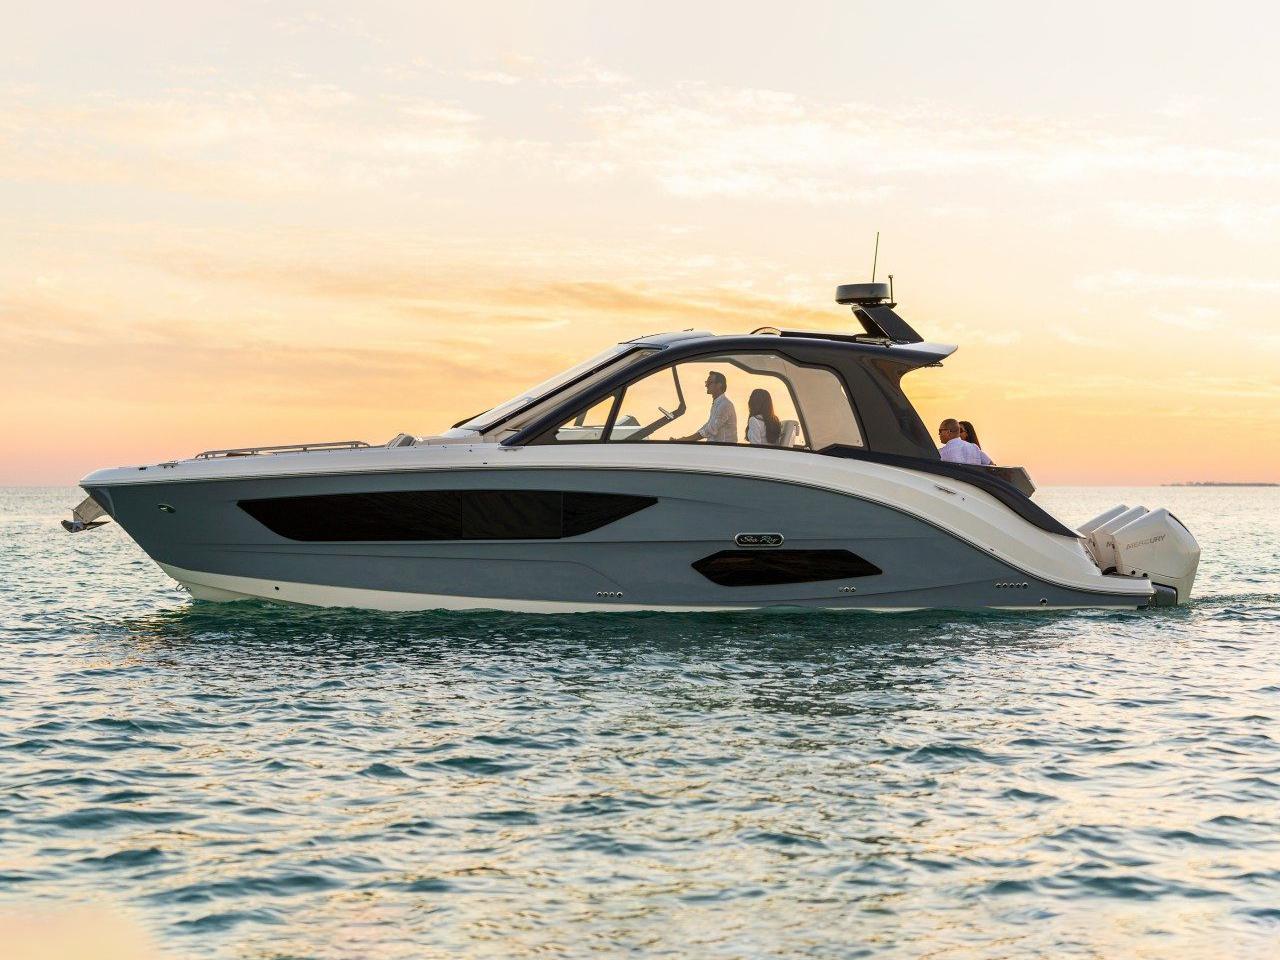 The Sundancer 370 Outboard is the product of a partnerhsip between BMW and Sea Ray.